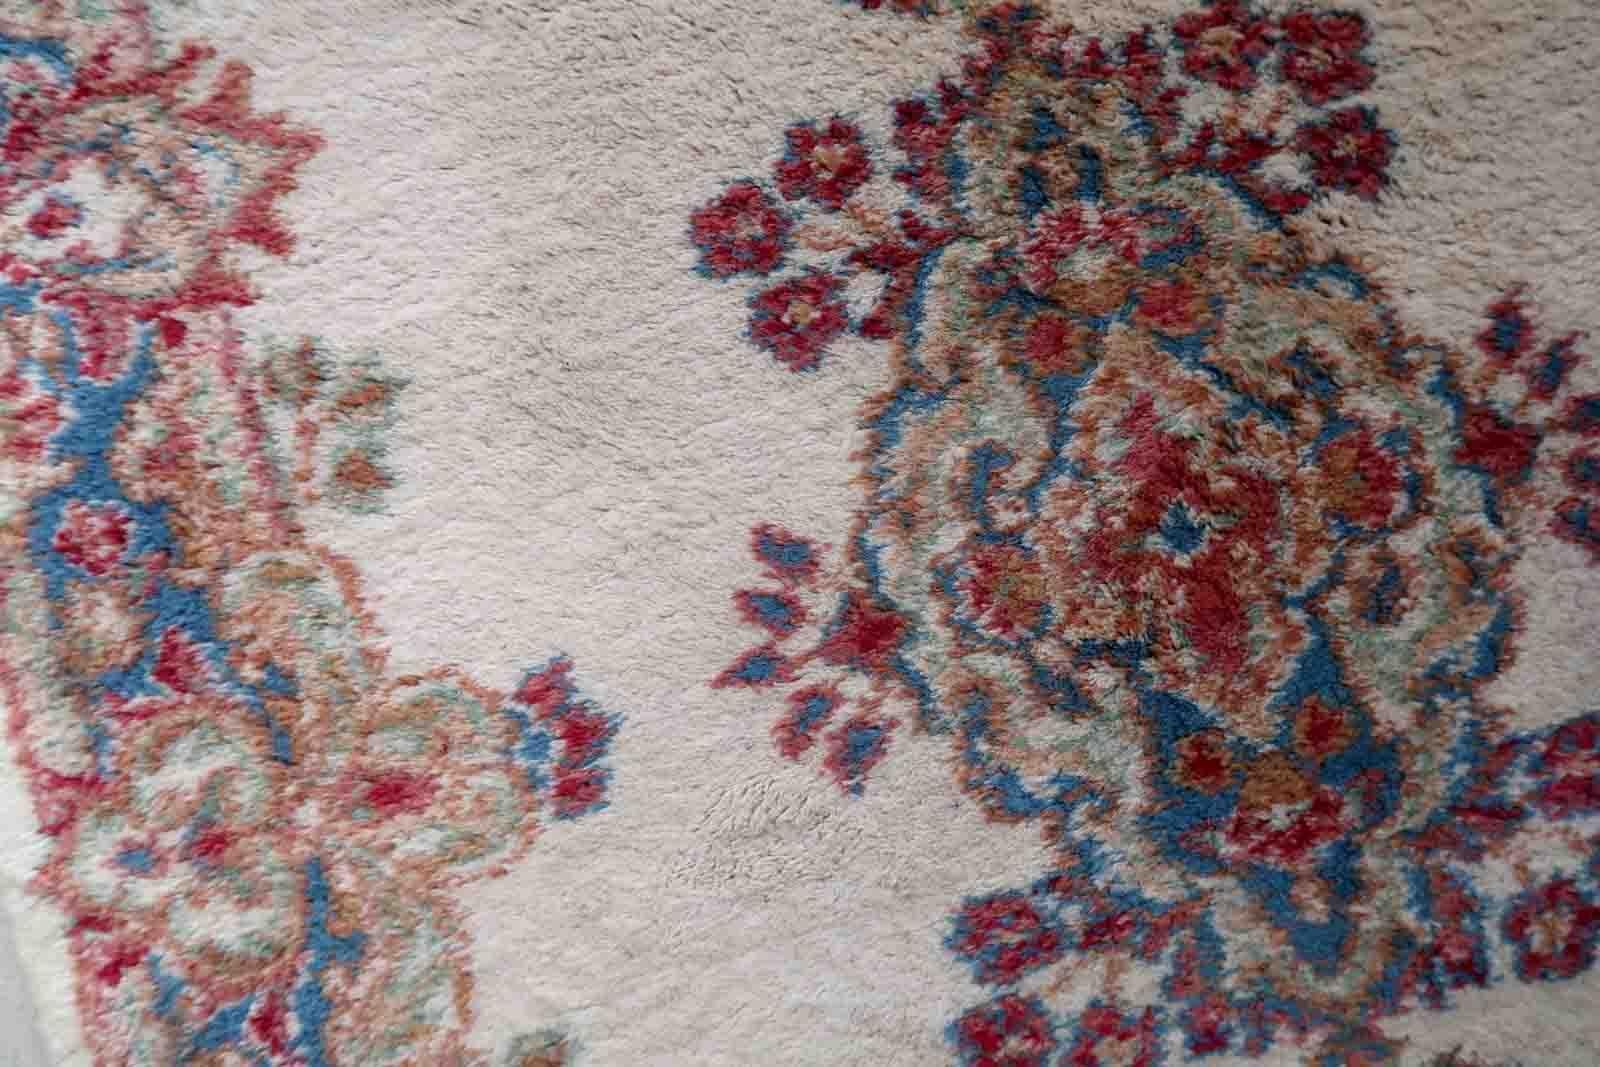 Handmade vintage Kerman rug in floral design and pastel shades. The rug is from the end of 20th century in original good condition.

-condition: original good,

-circa: 1960s,

-Size: 3' x 4.8' (92cm x 147cm),

-Material: wool,

-Country